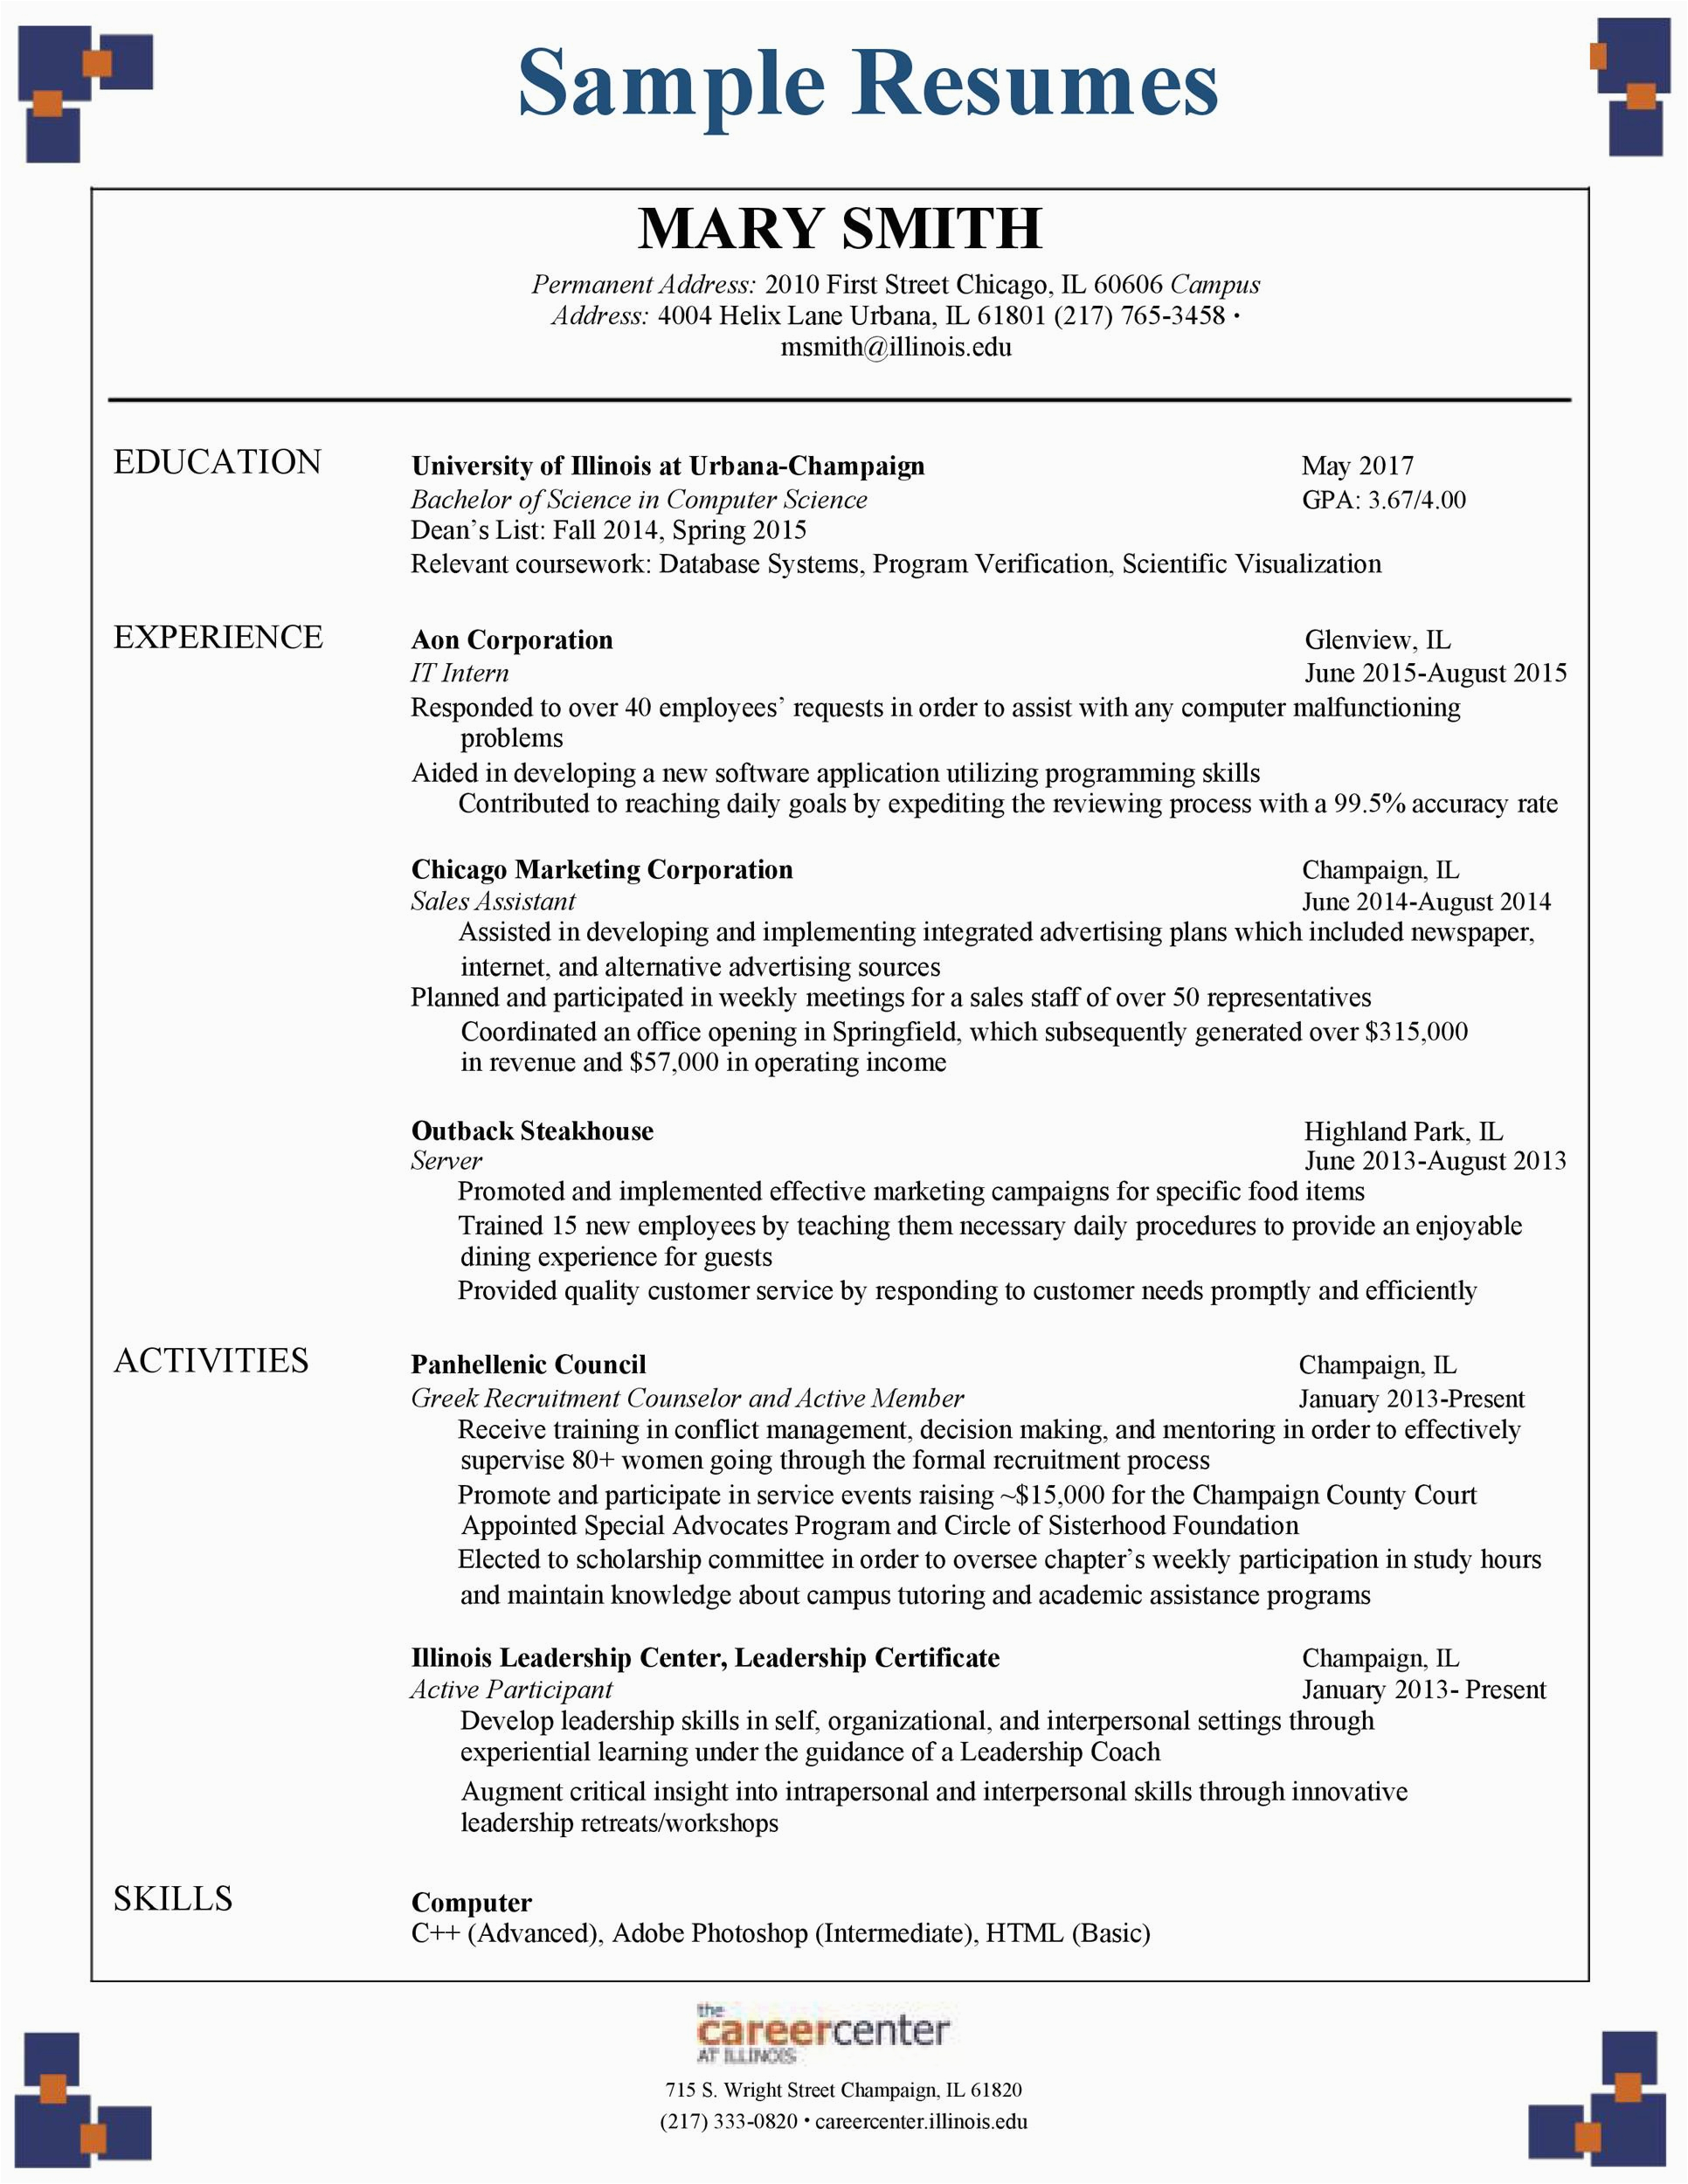 Resume Template for College Applications Free College Application Resume Template Resume Templates for